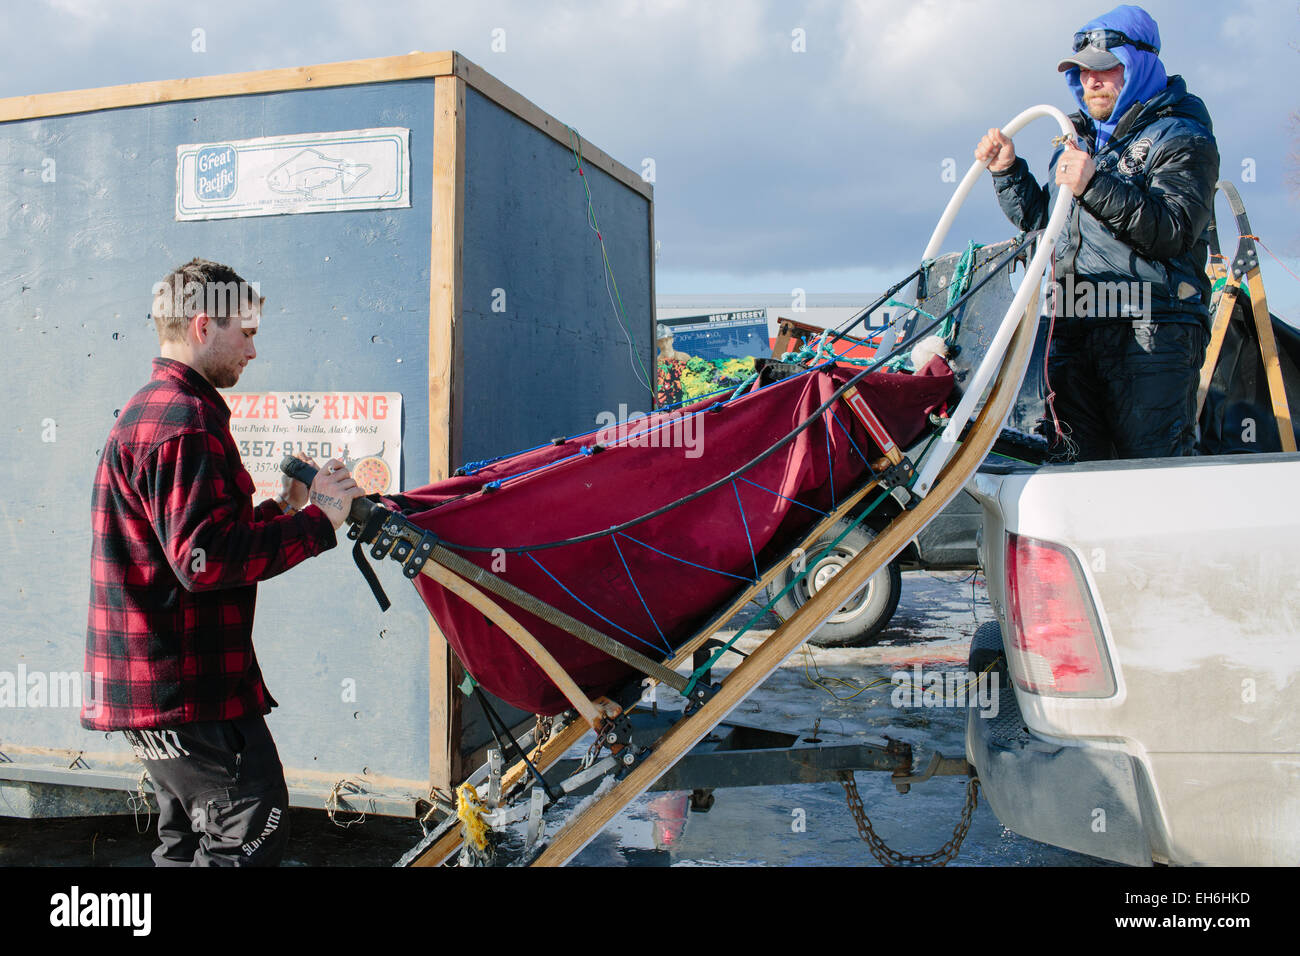 Jason Mackey (right) loads a dog sled in the back of a truck following the Ceremonial Start of the 2015 Iditarod Dog Sled Race at Anchorage (USA) on March 7, 2015. The race will resume with the official start in Fairbanks on March 9. Photo: Joshua Corbett/dpa (zu dpa: Alaska, Land des Hechelns: «Das härteste Schlittenrennen der Welt» vom 08.03.2015) Stock Photo